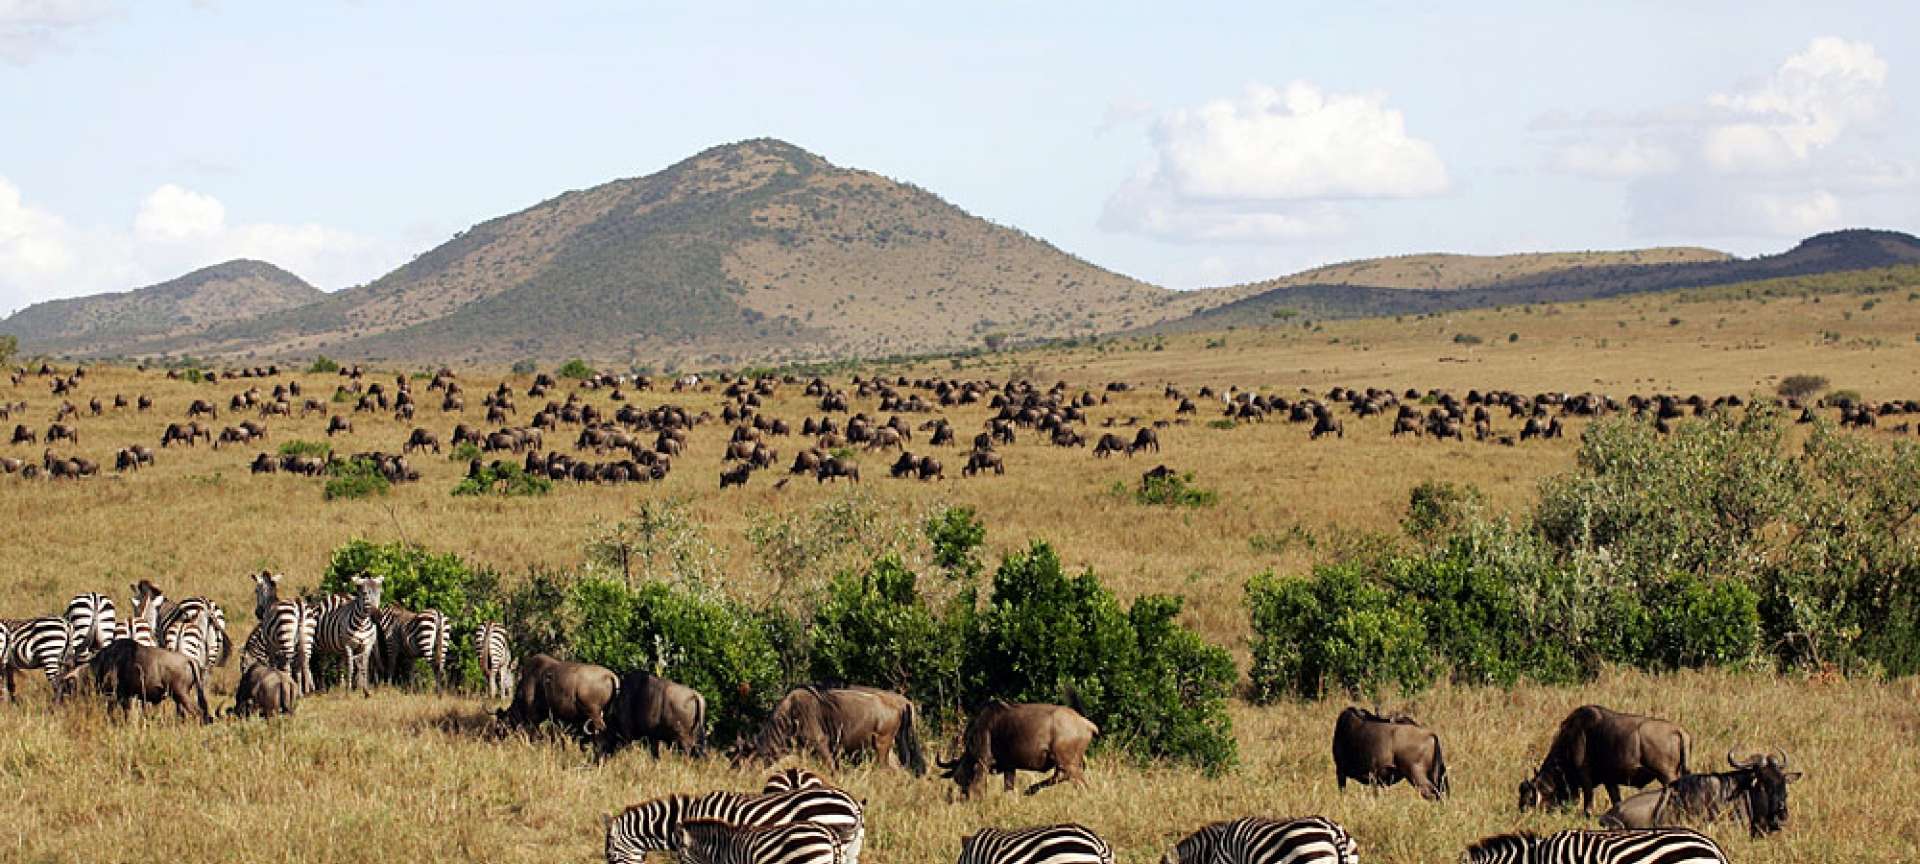 Wildebeest are in their numbers this time of the year